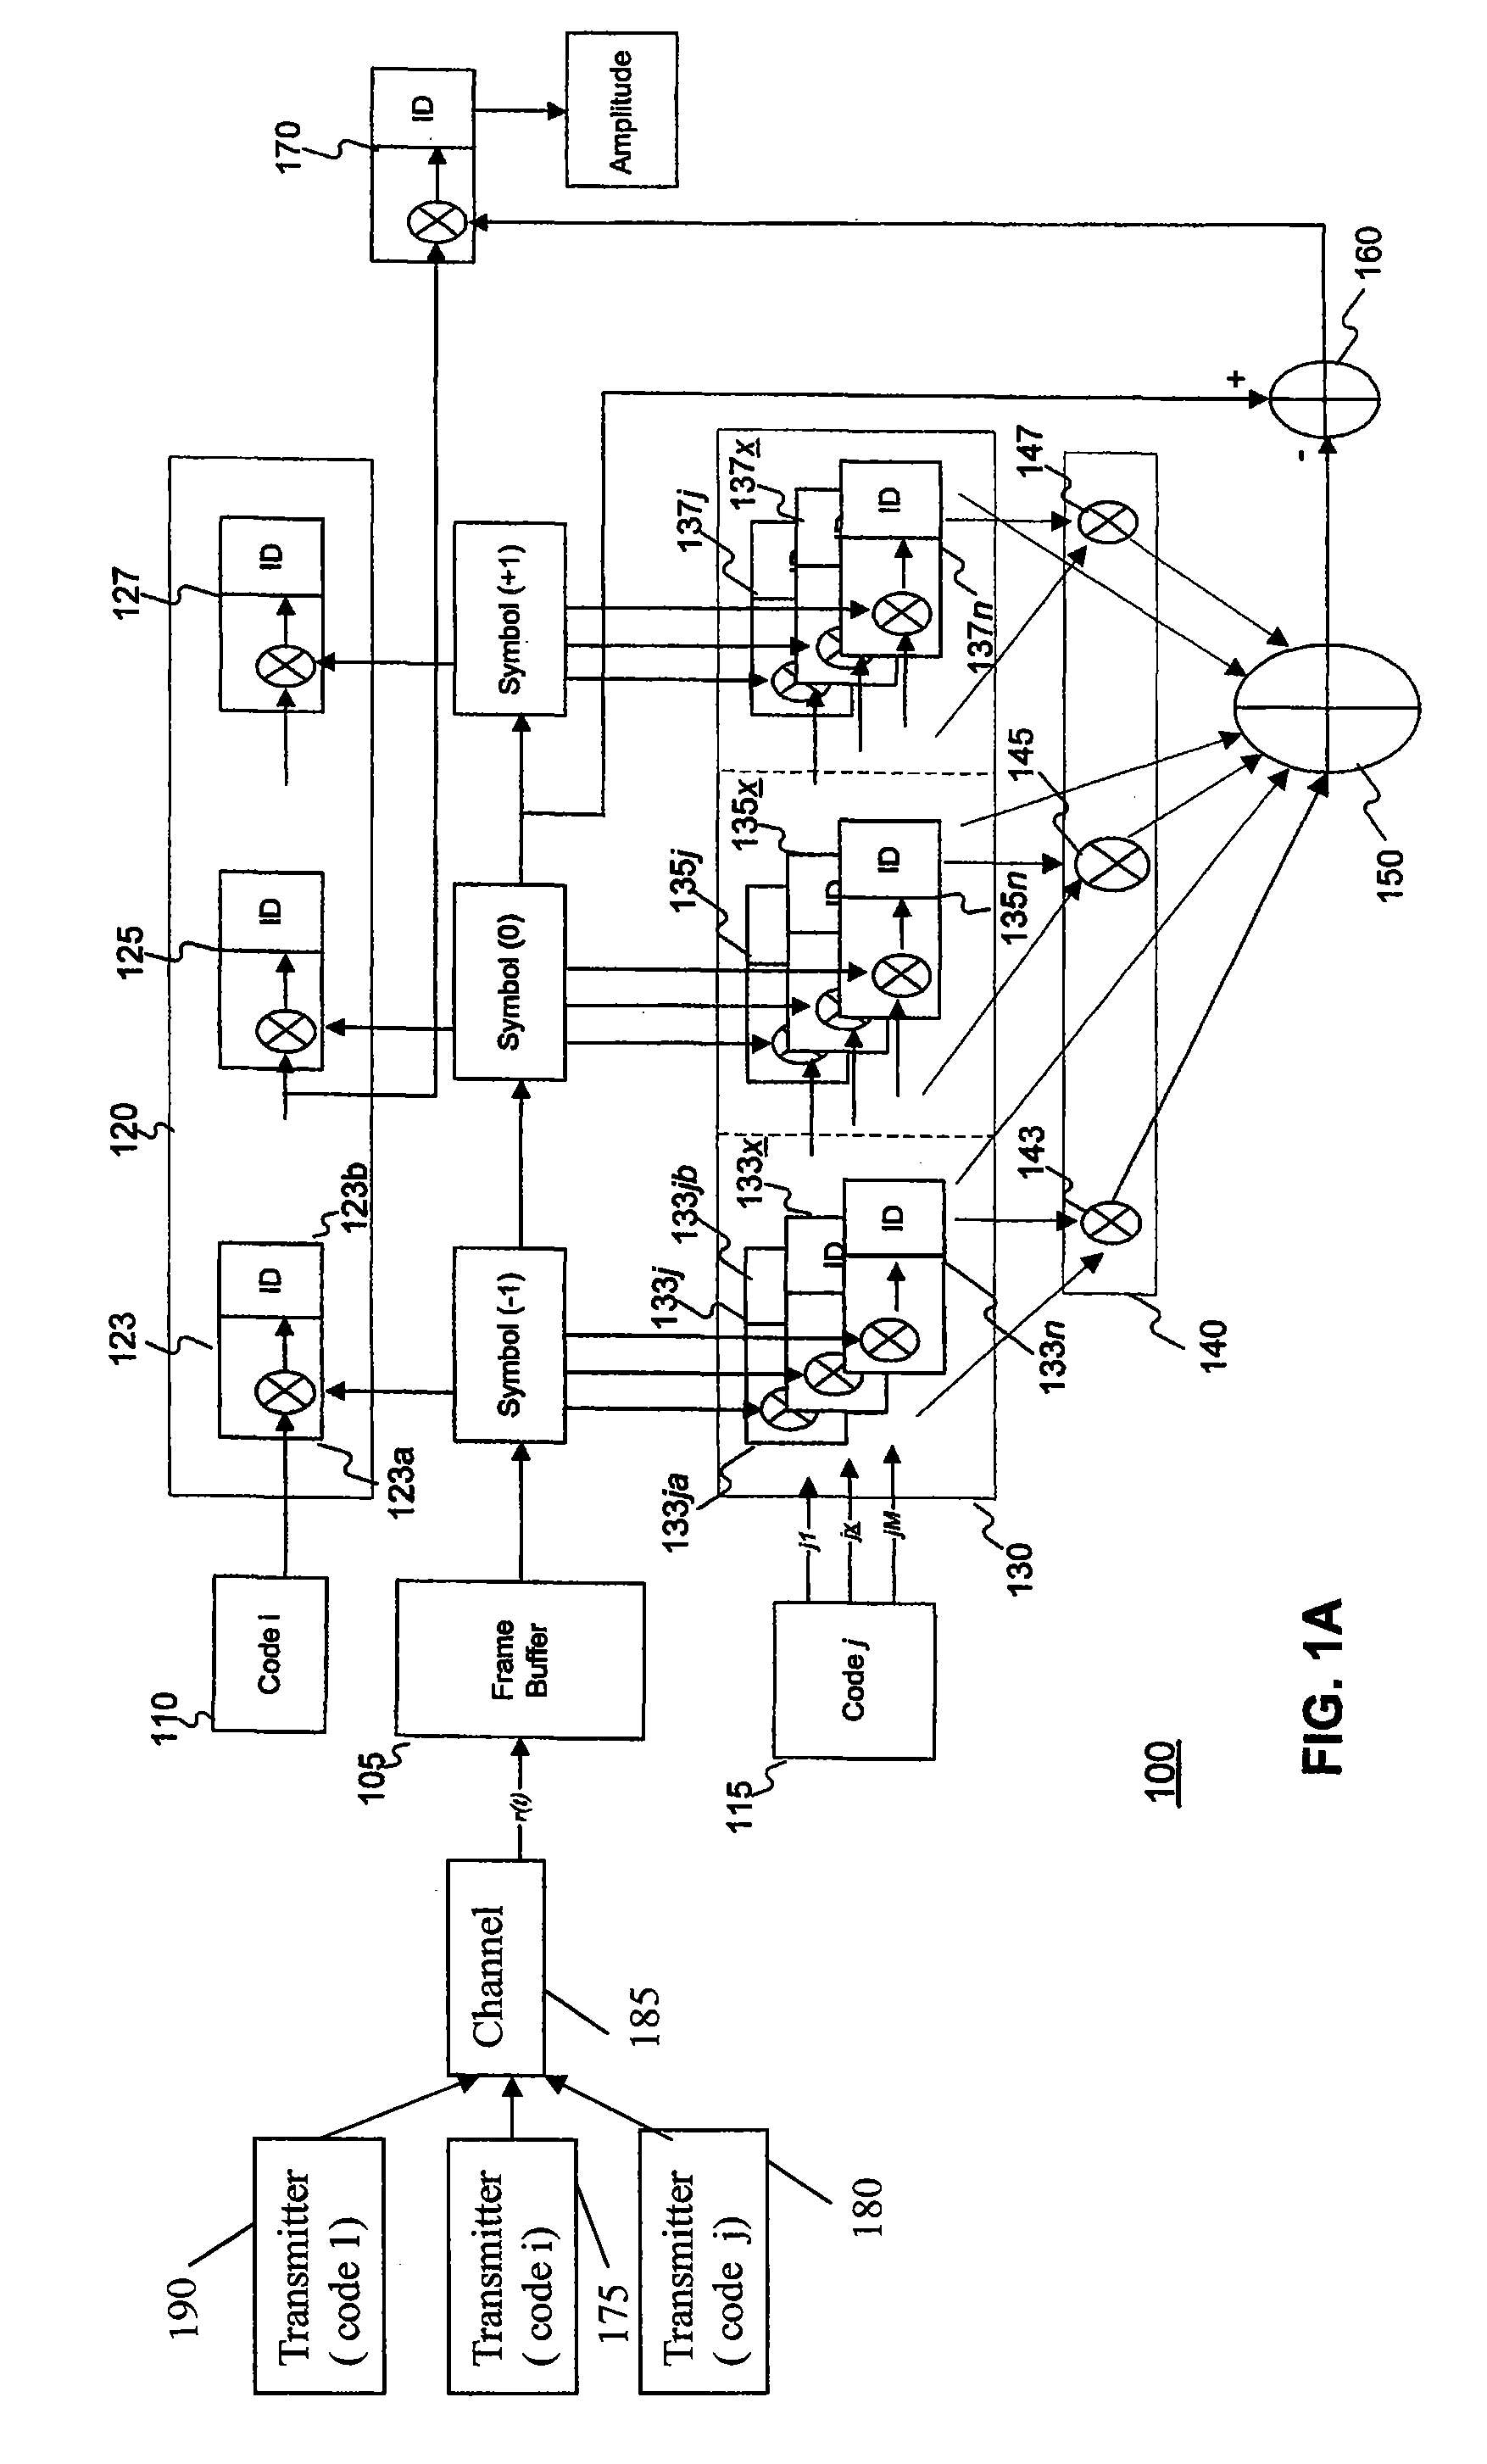 Method and system of interference cancellation in multi-cell CDMA systems